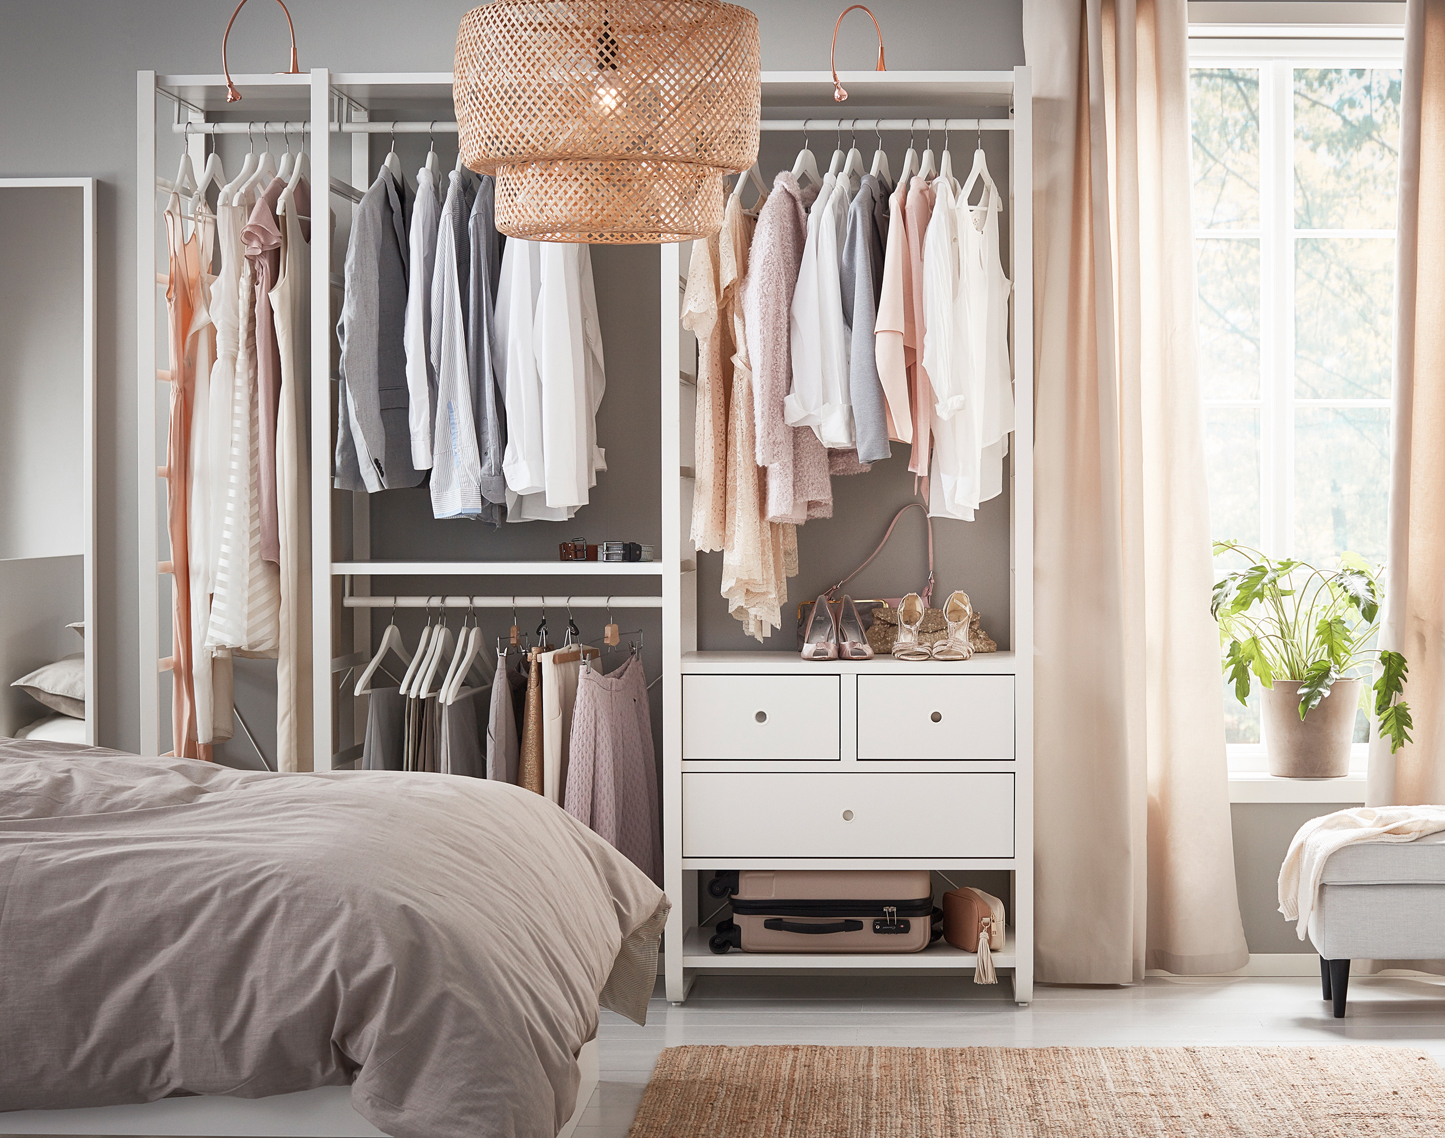 How to create a dressing room: 10 ideas to perfect your space | Real Homes